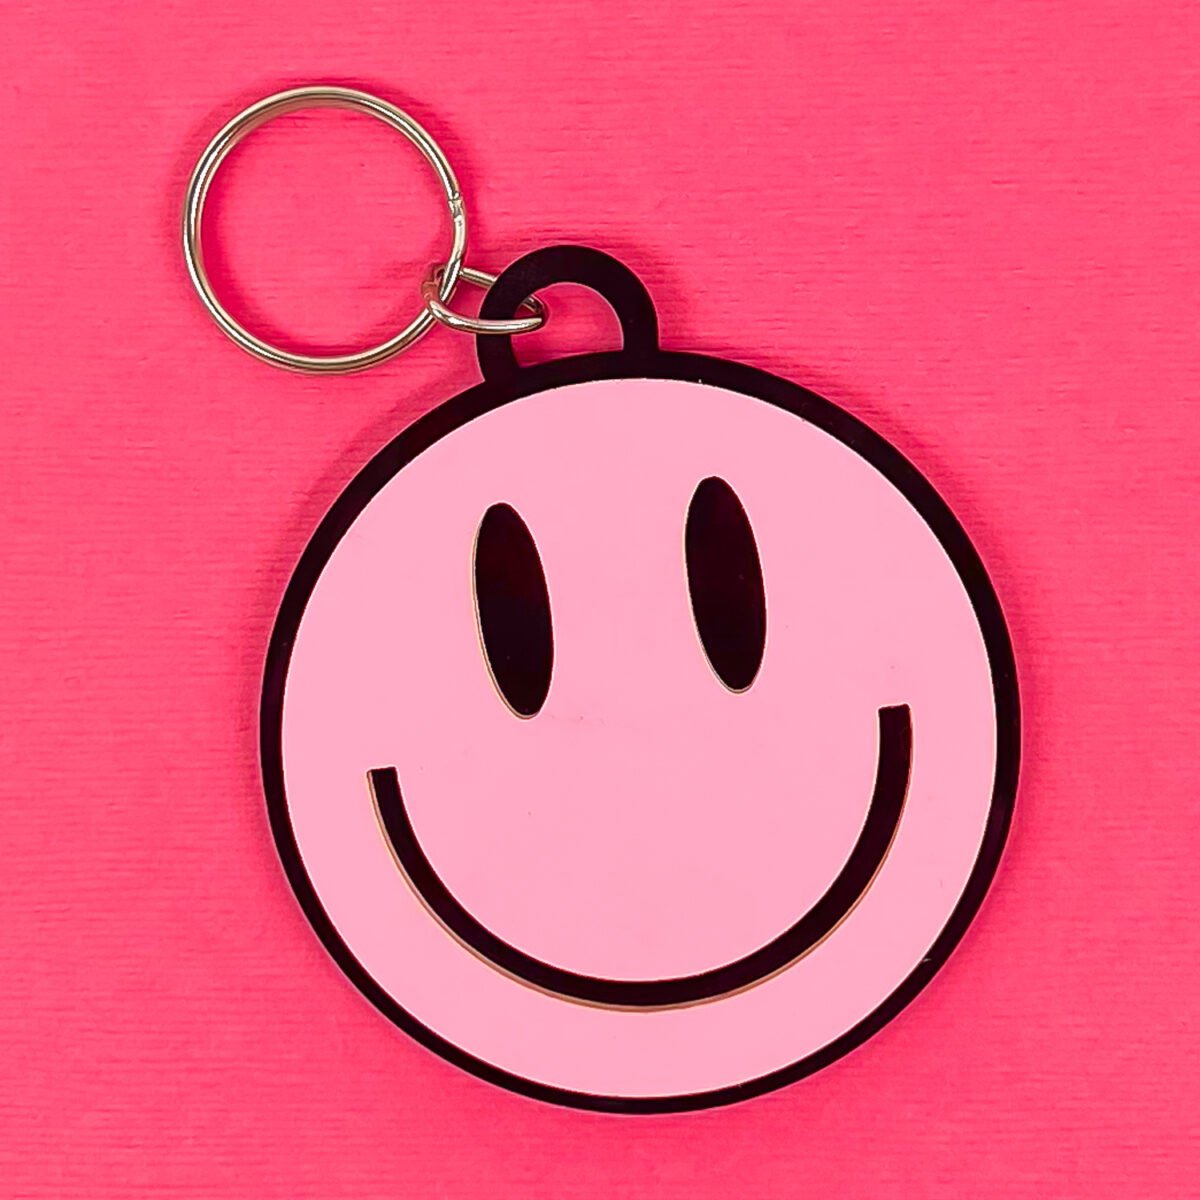 Happy face keychain on pink background